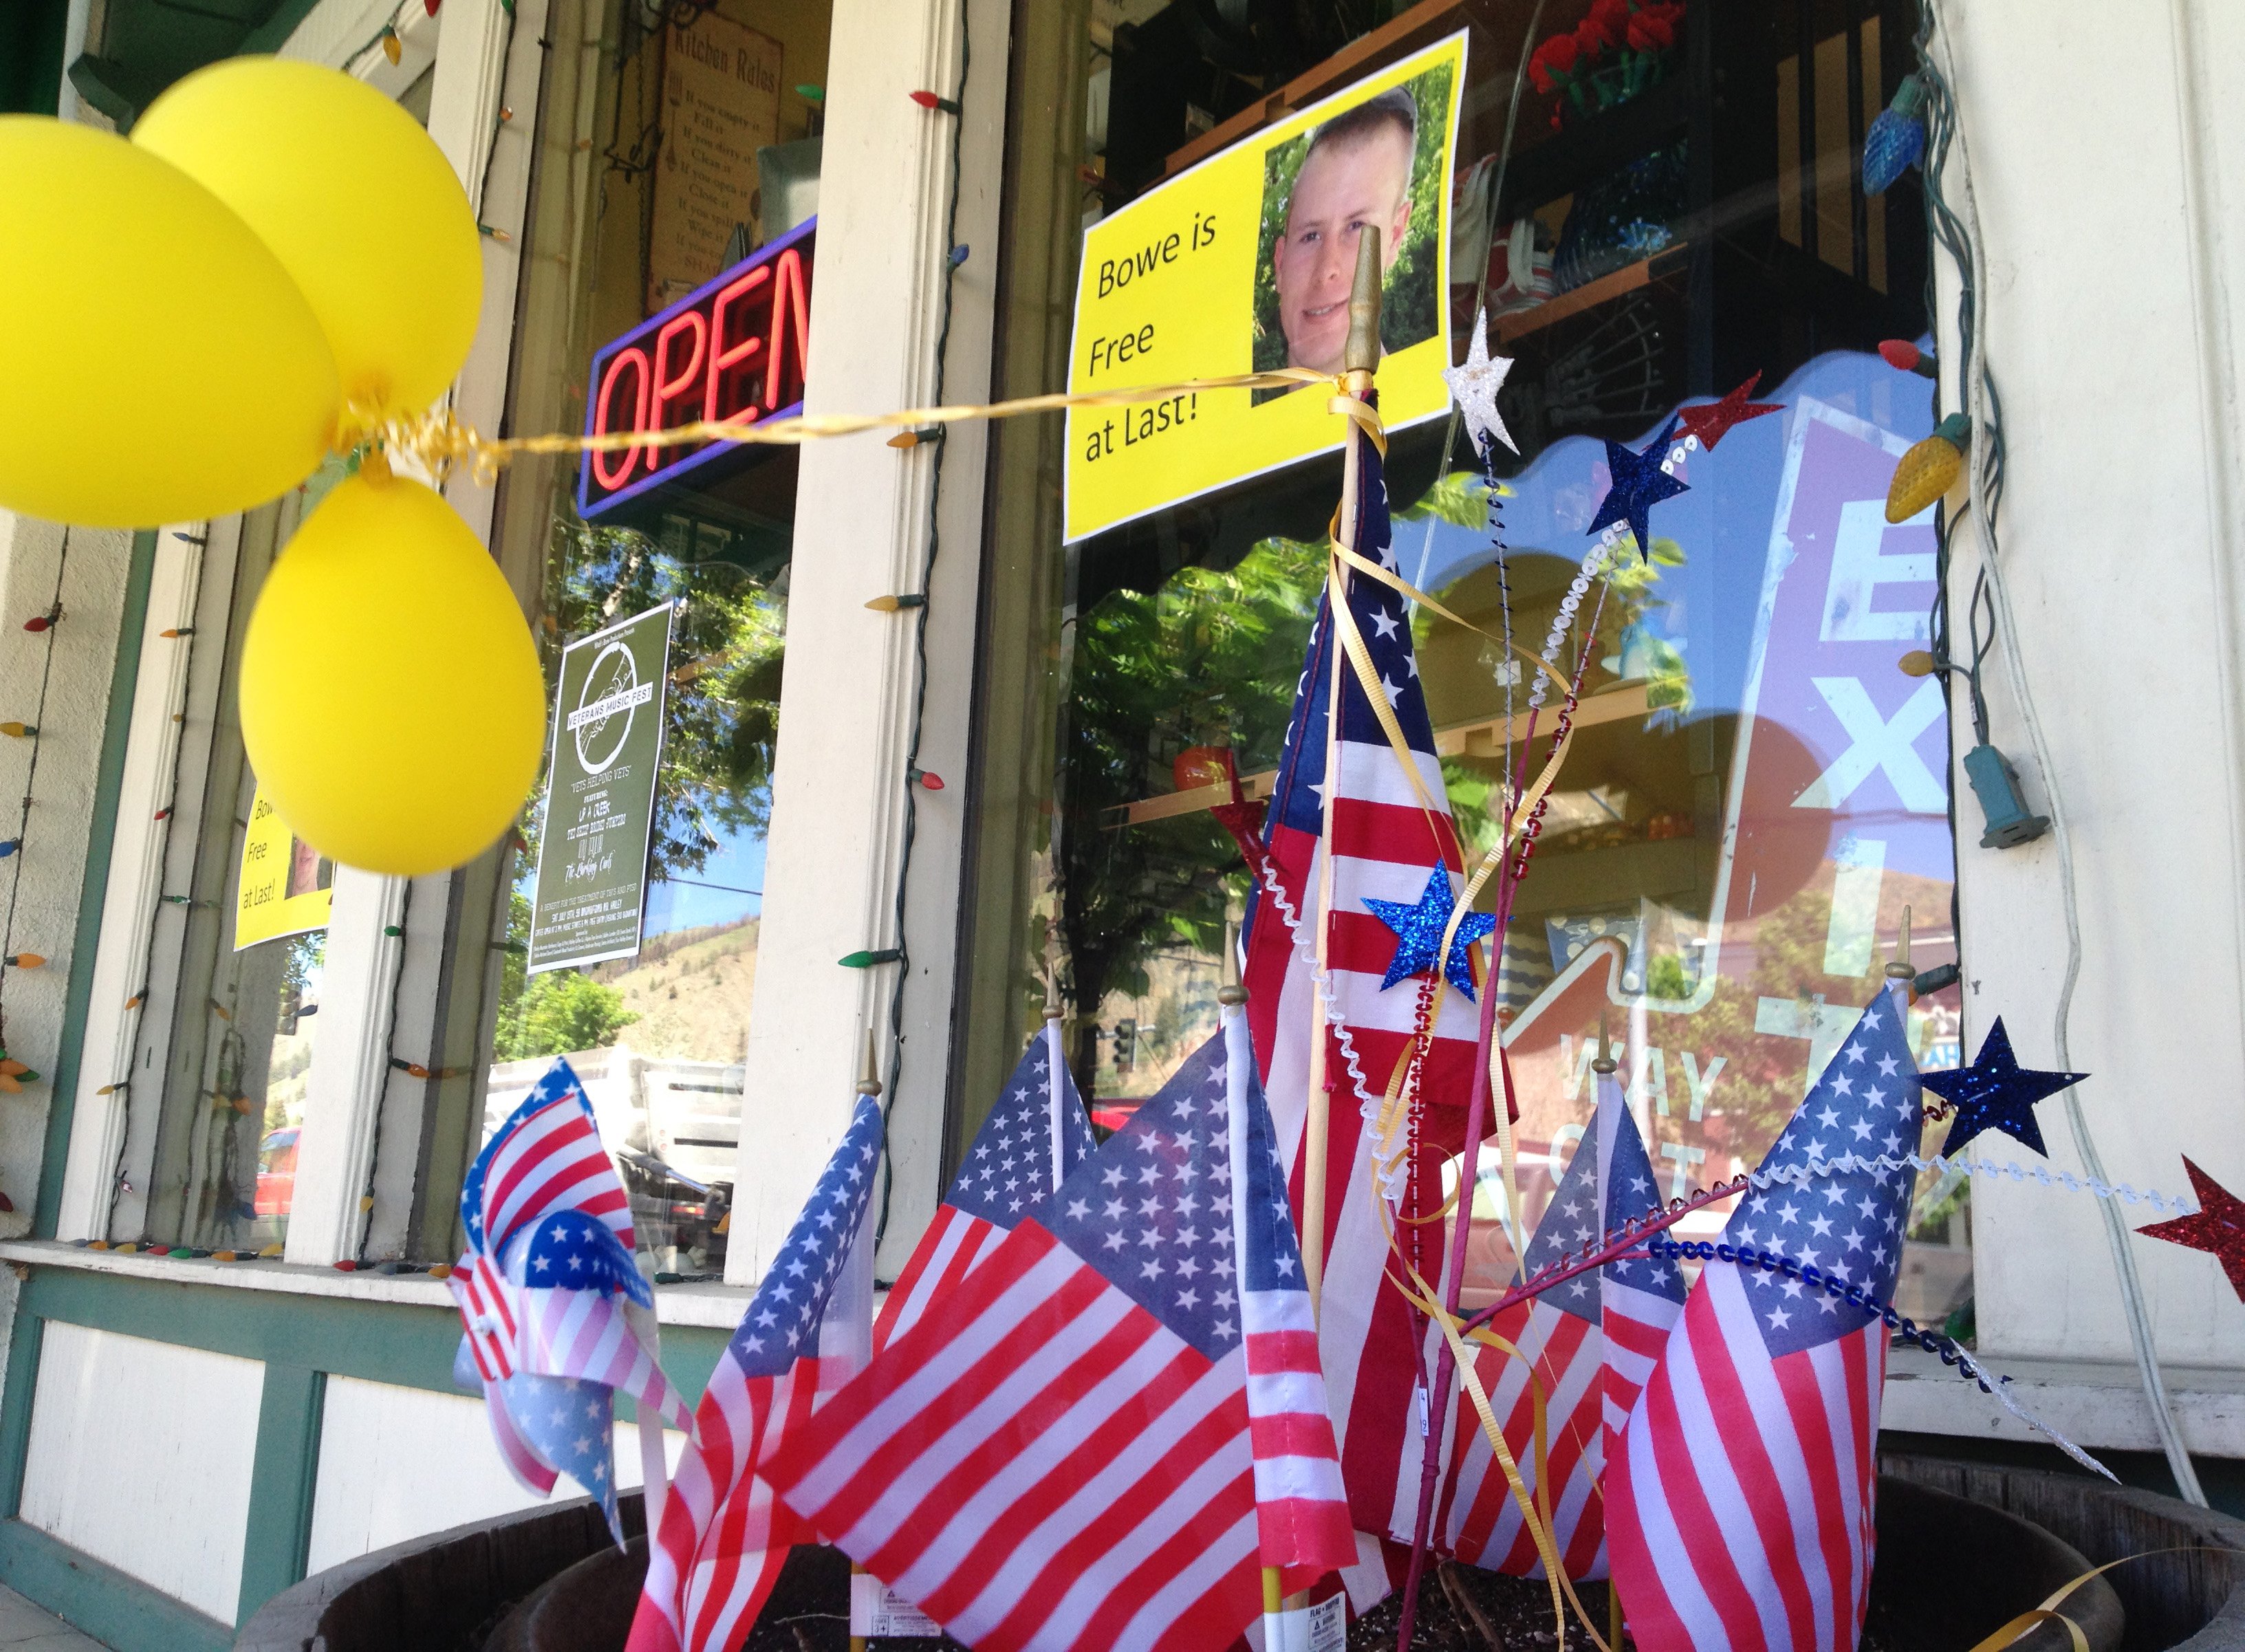 Flags and balloons, marking the release from captivity of Sgt. Bowe Bergdahl, adorn the sidewalk outside a shop in the soldier's hometown of Hailey, Idaho, on June 4, 2014. (Brian Skoloff—AP)